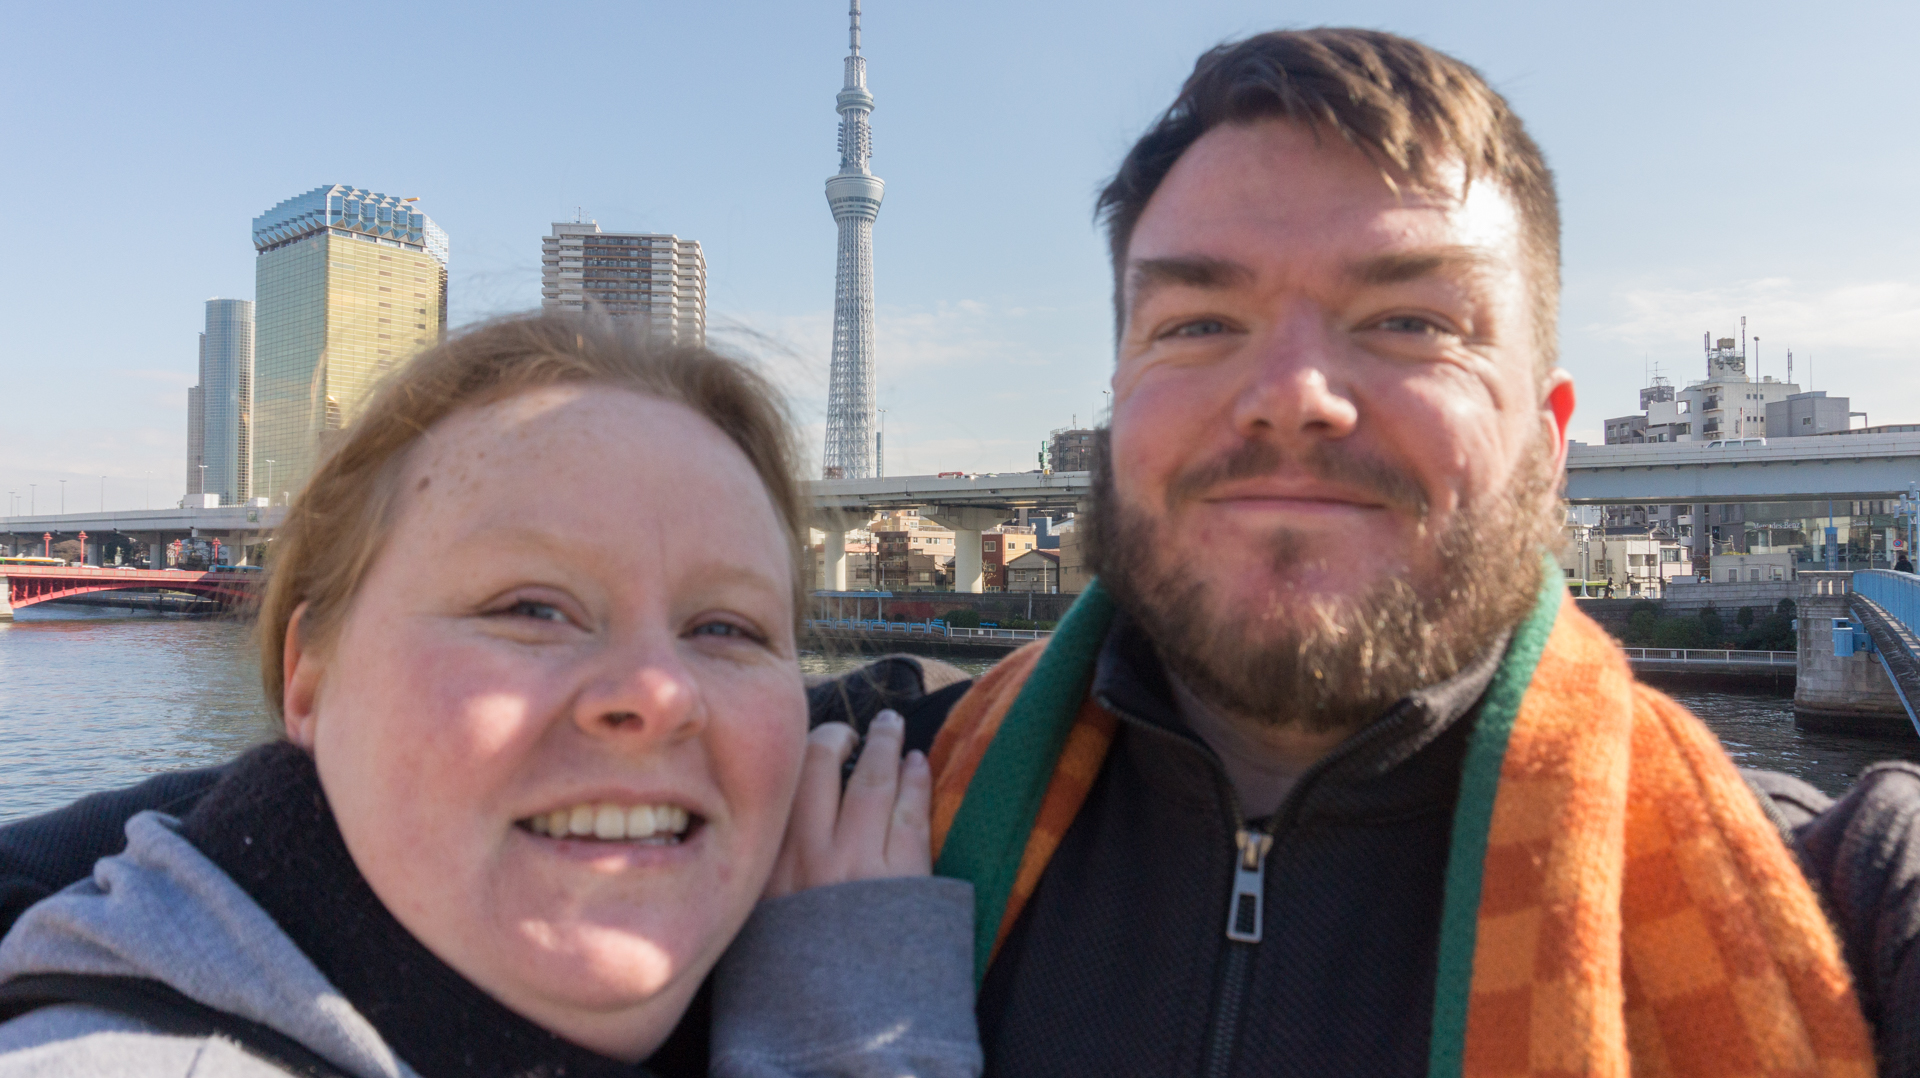 Our first (and so far only) trip together was to Japan, a place we've both wanted to go since we were much younger. Behind us is the Tokyo Skytree, you should ask us about the rad photos we took around it!